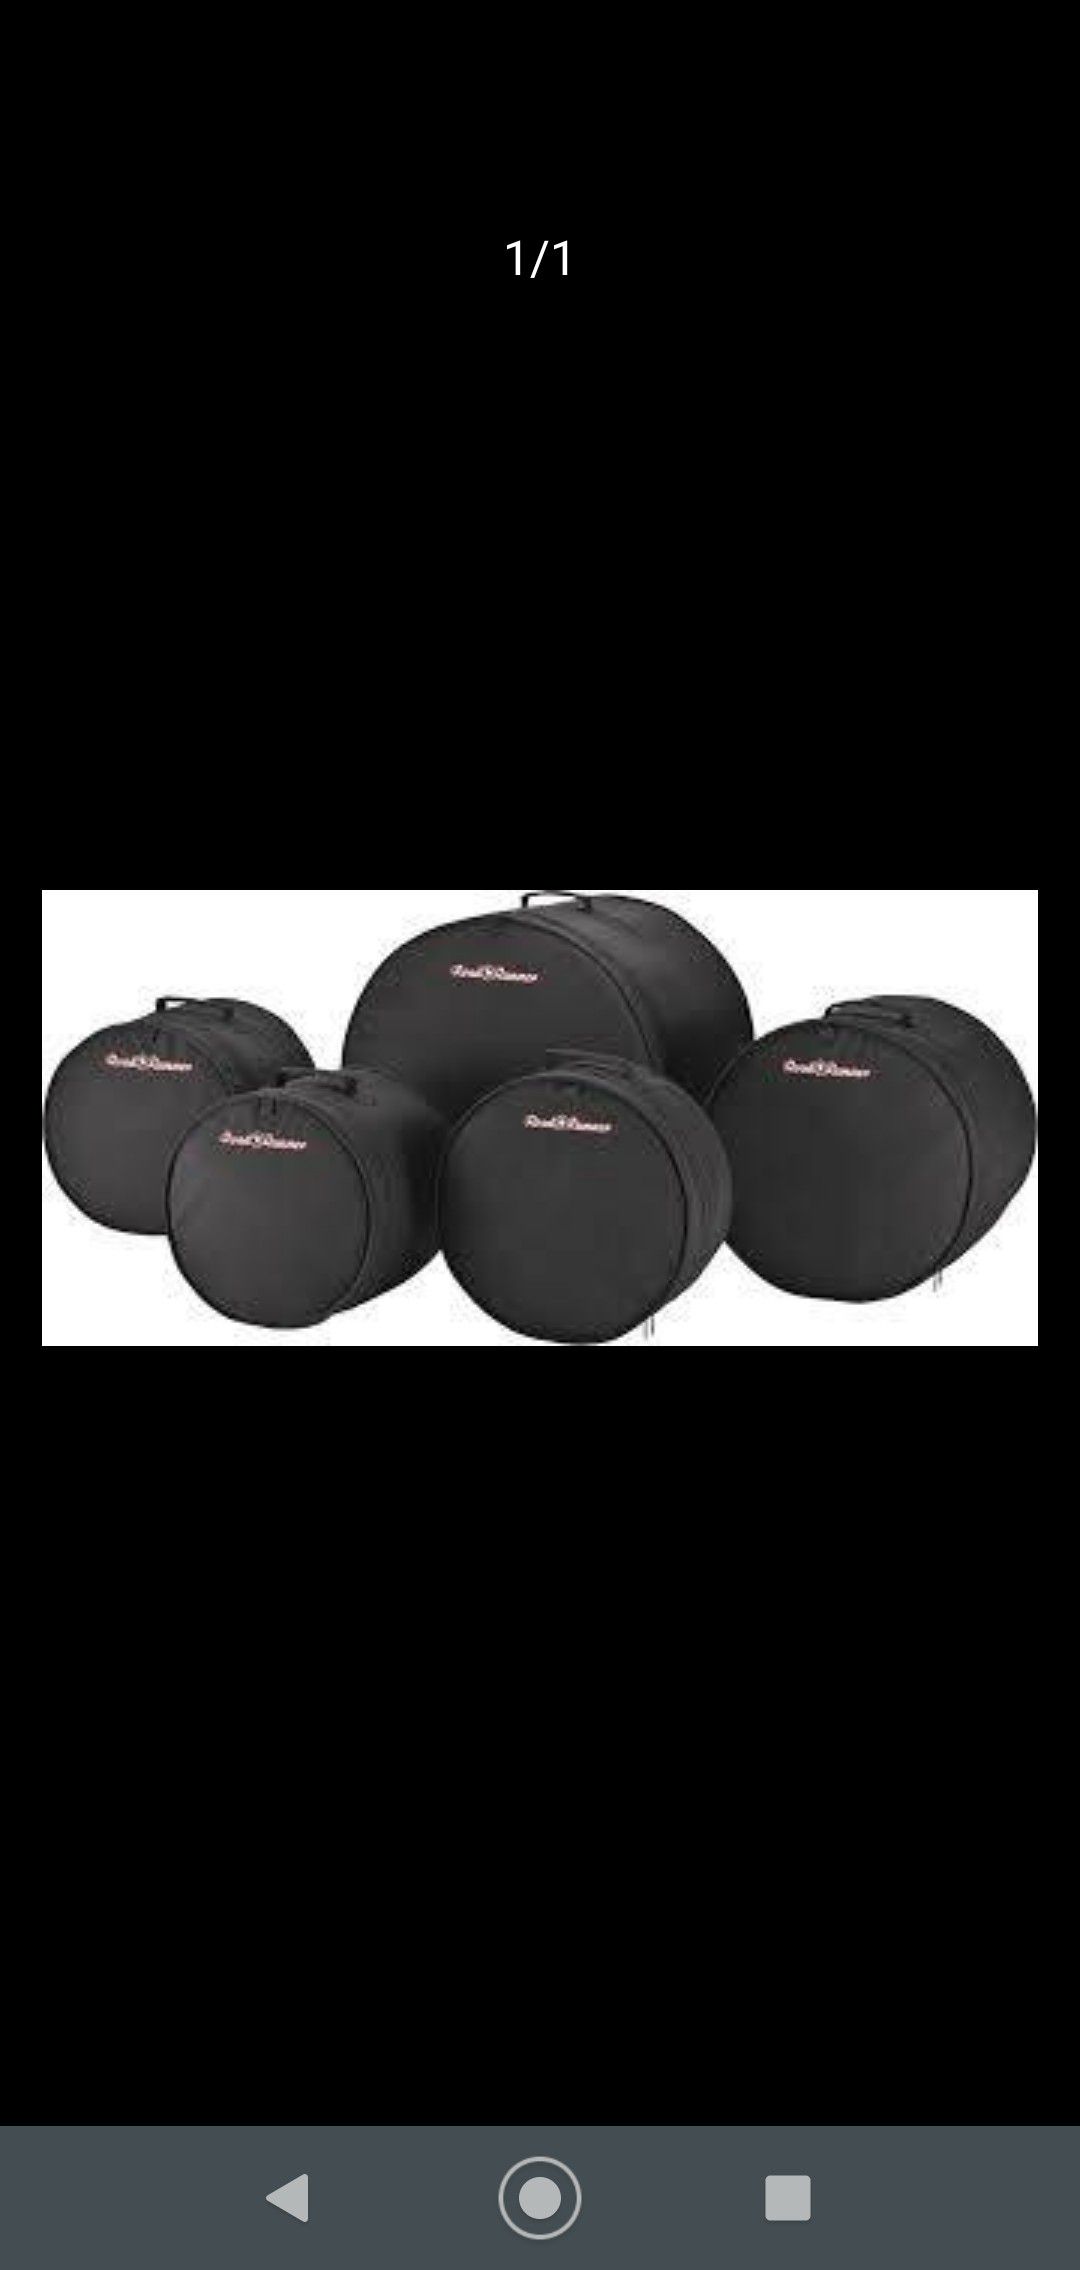 Road Runner Drum Bags for 5 piece set!